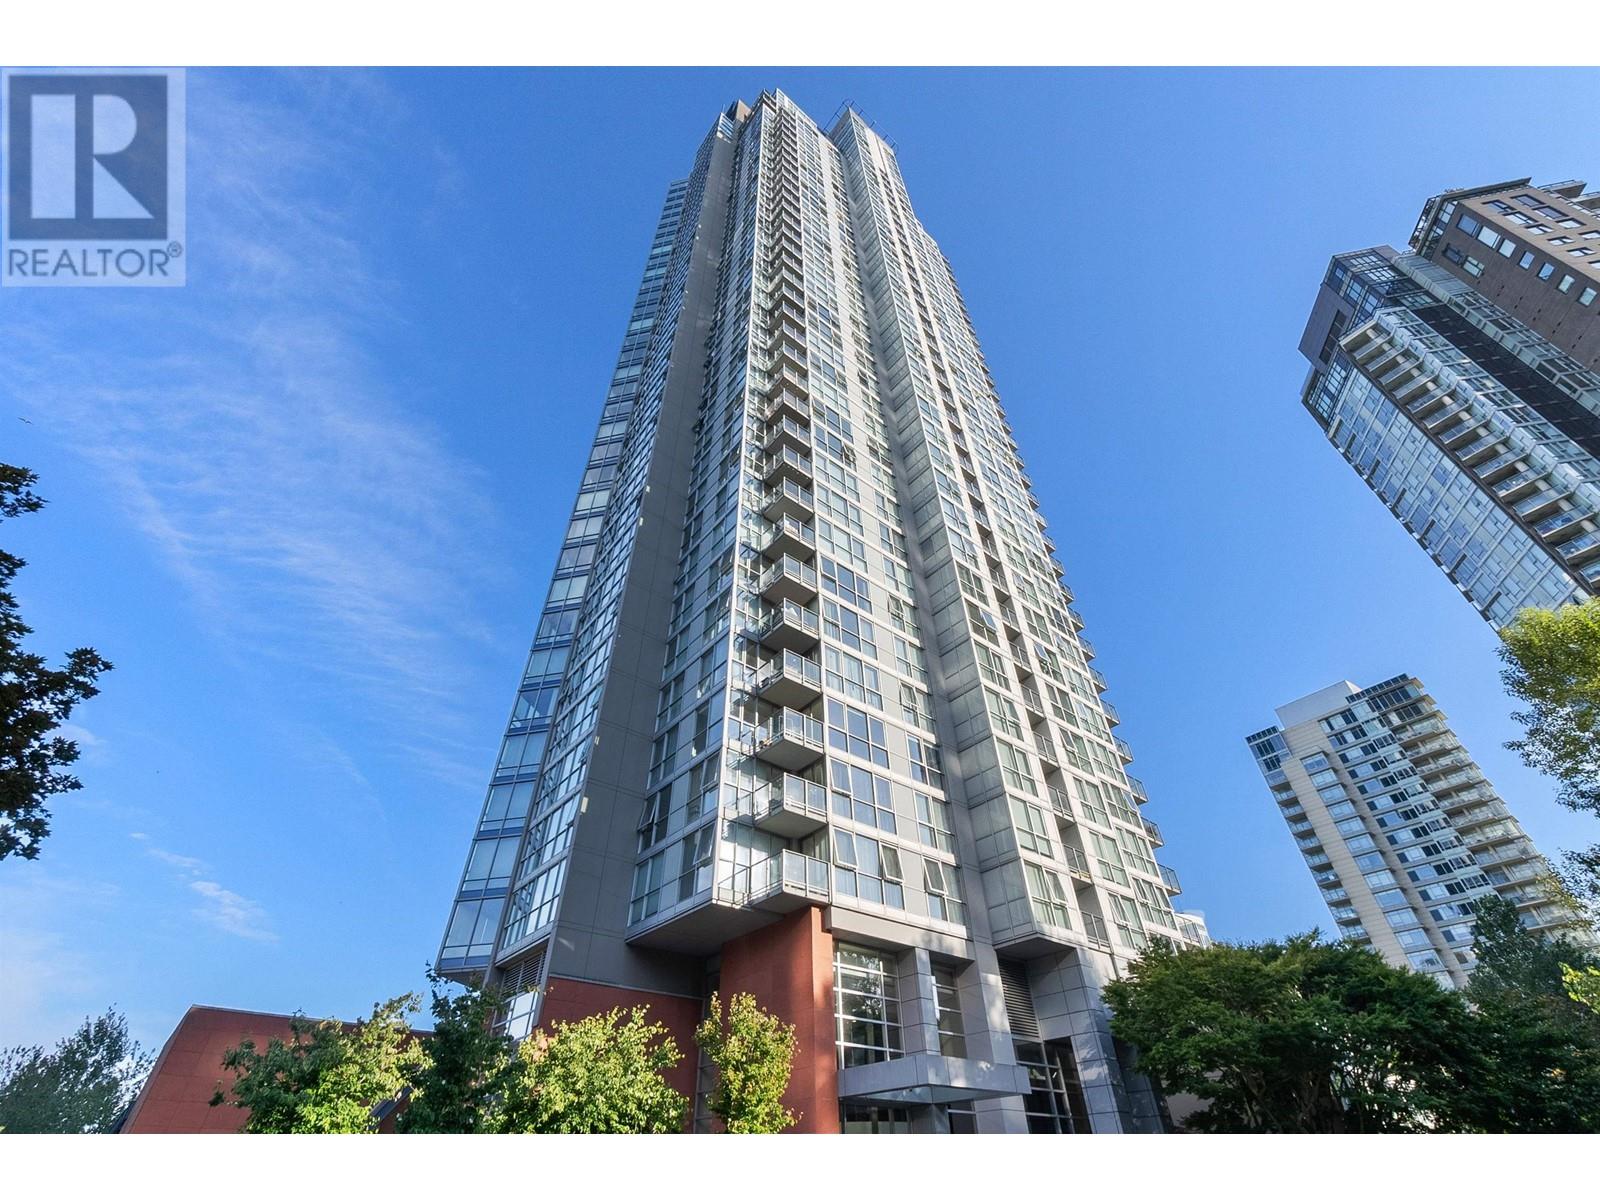 Listing Picture 33 of 33 : 508 1408 STRATHMORE MEWS, Vancouver / 溫哥華 - 魯藝地產 Yvonne Lu Group - MLS Medallion Club Member